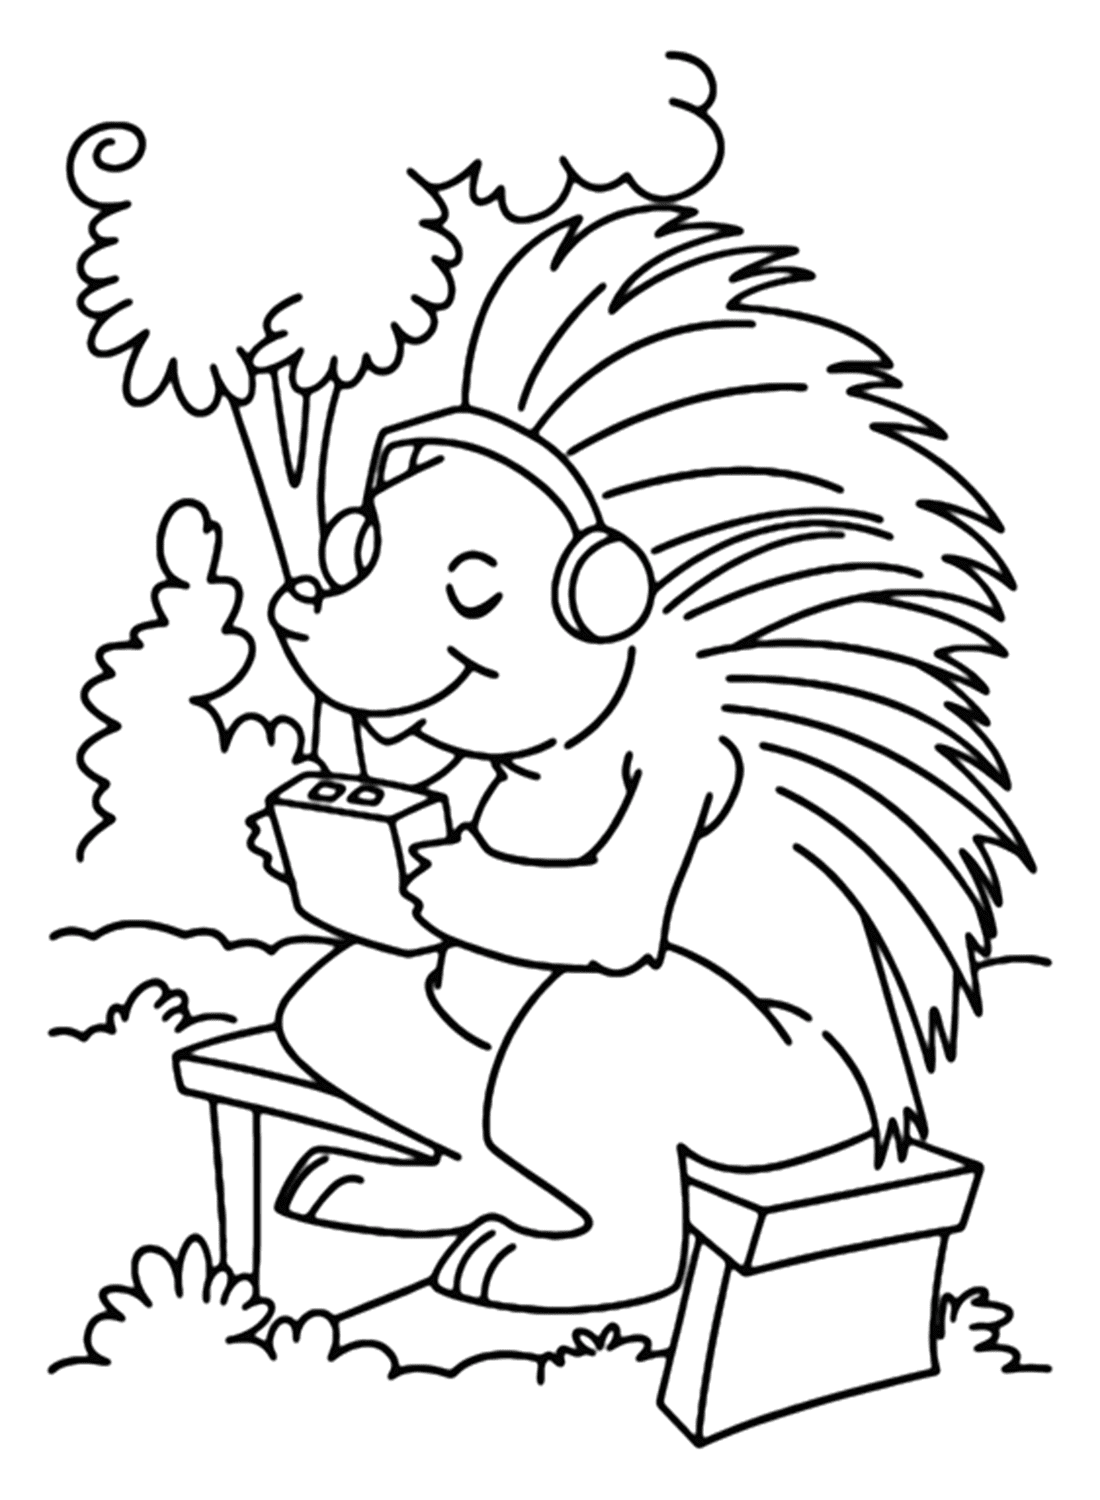 Lovely Porcupine Coloring Page PDF from Porcupine